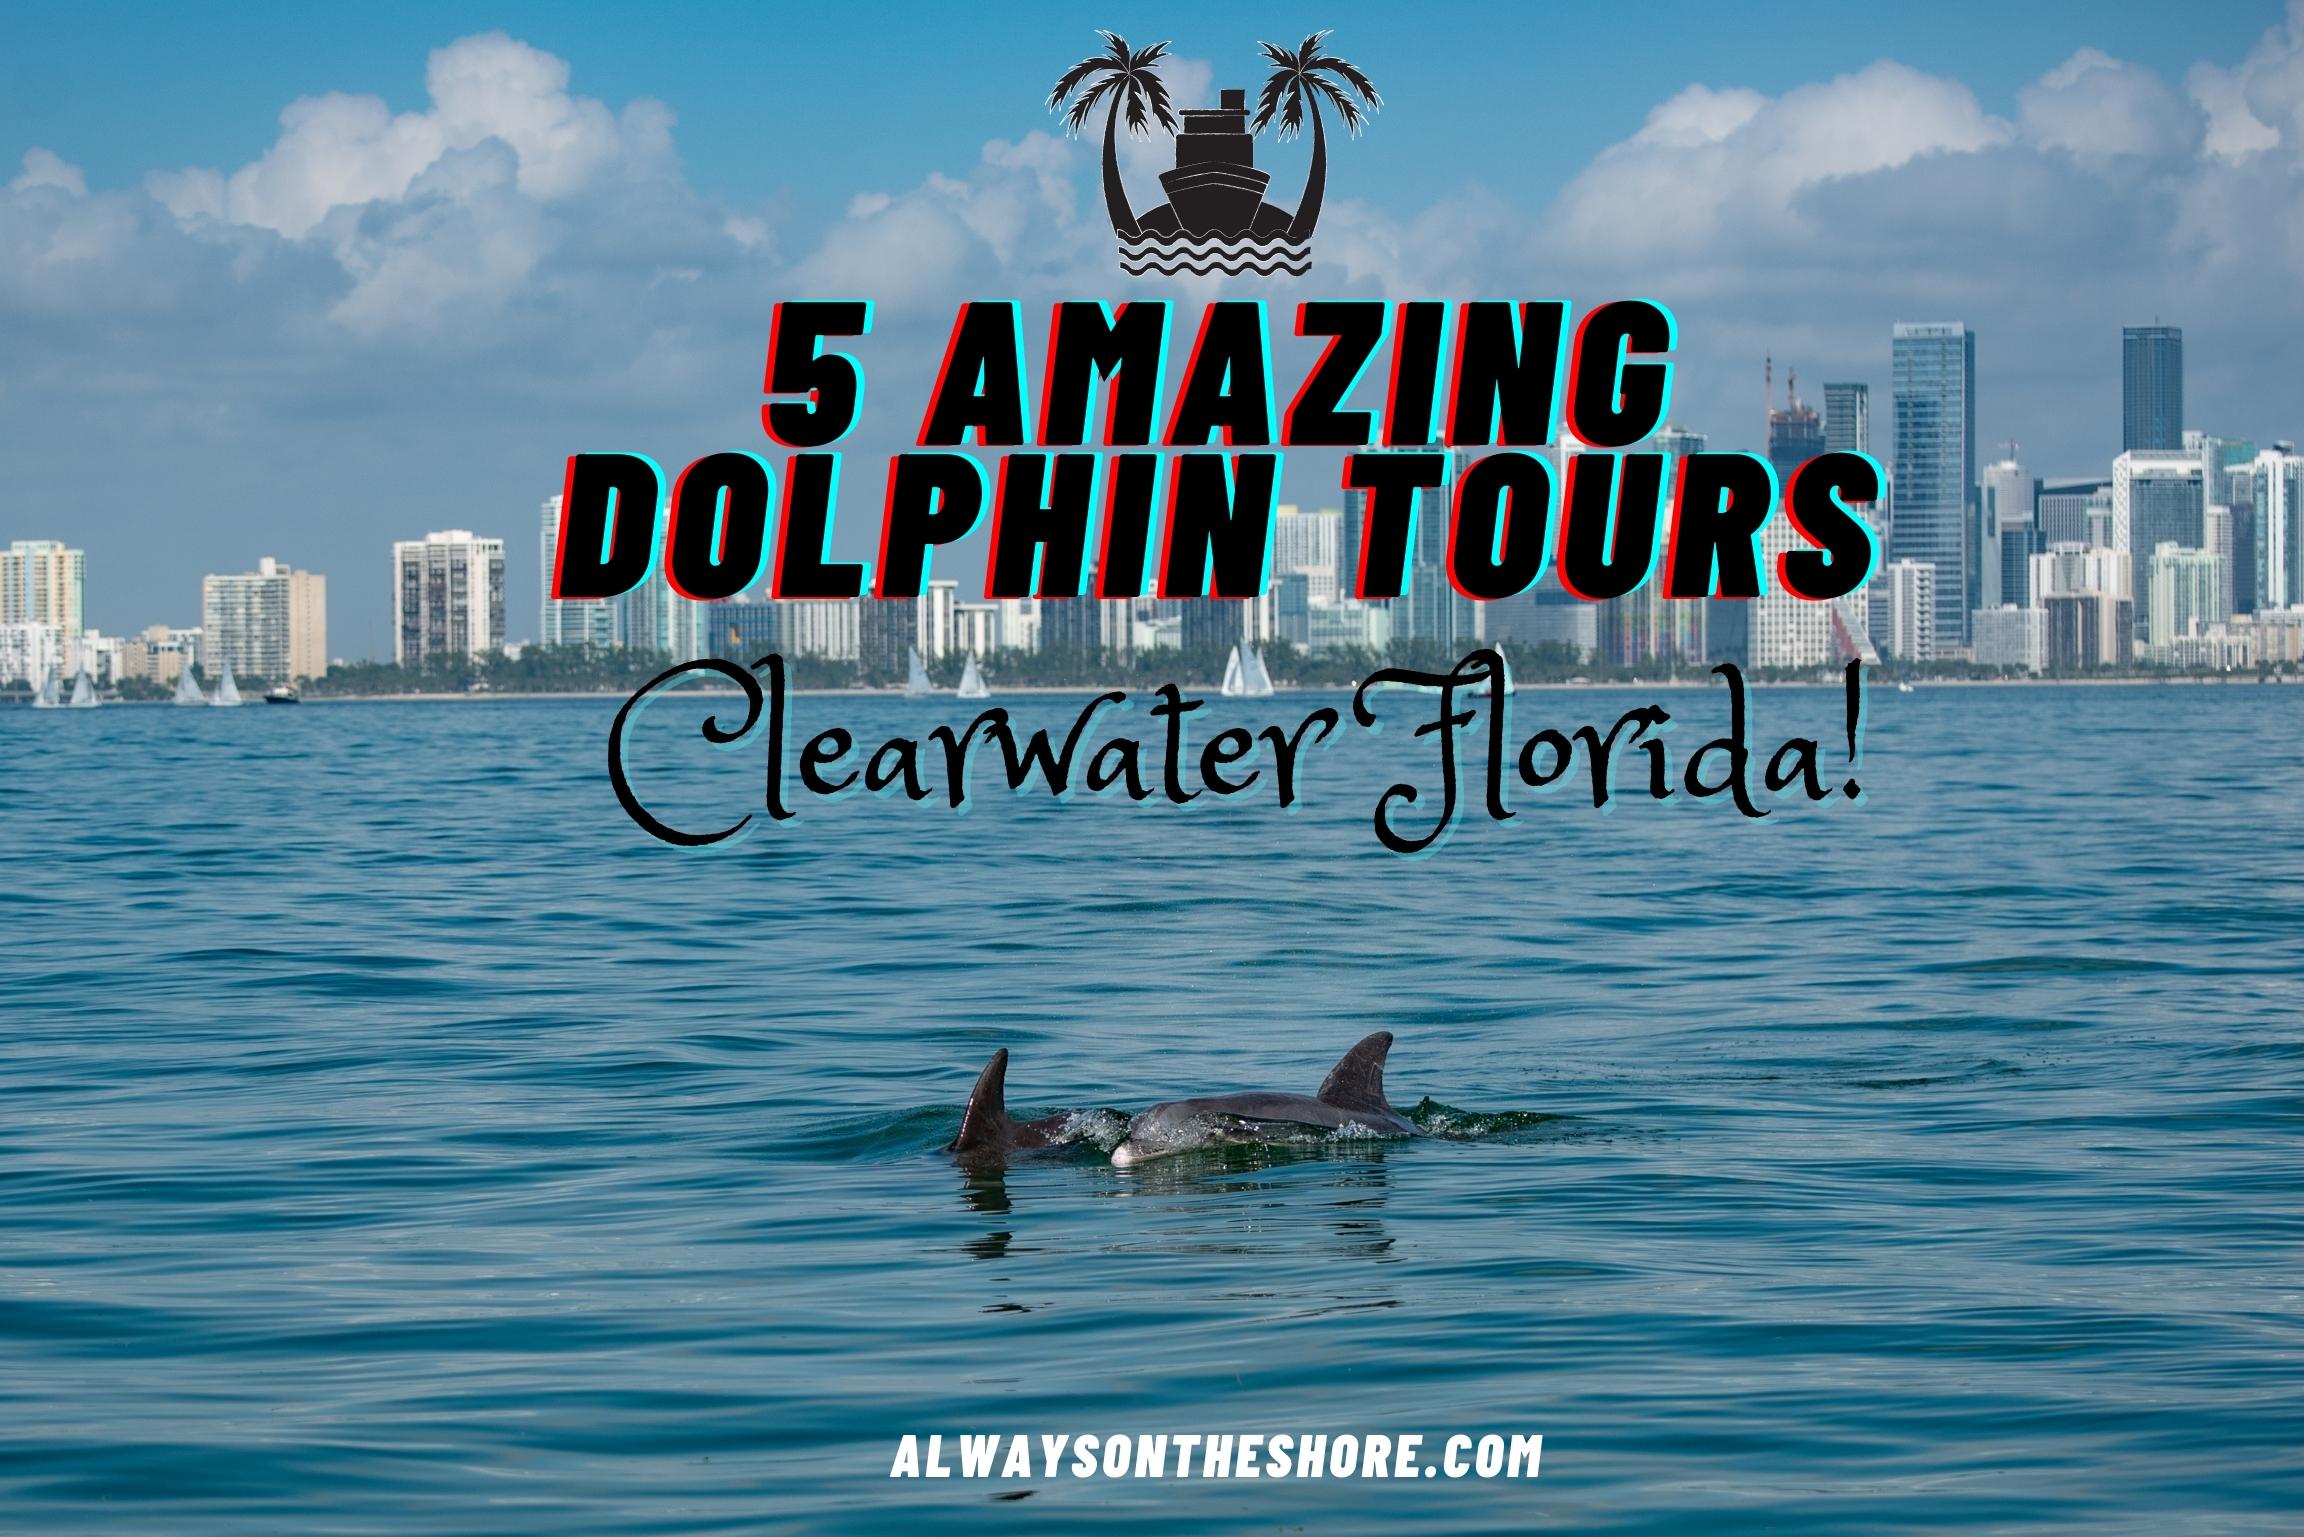 photo of a dolphin's back with the scenic background of buildings in Miami Florida with caption 5 Amazing Dolphin Tours Clearwater Florida